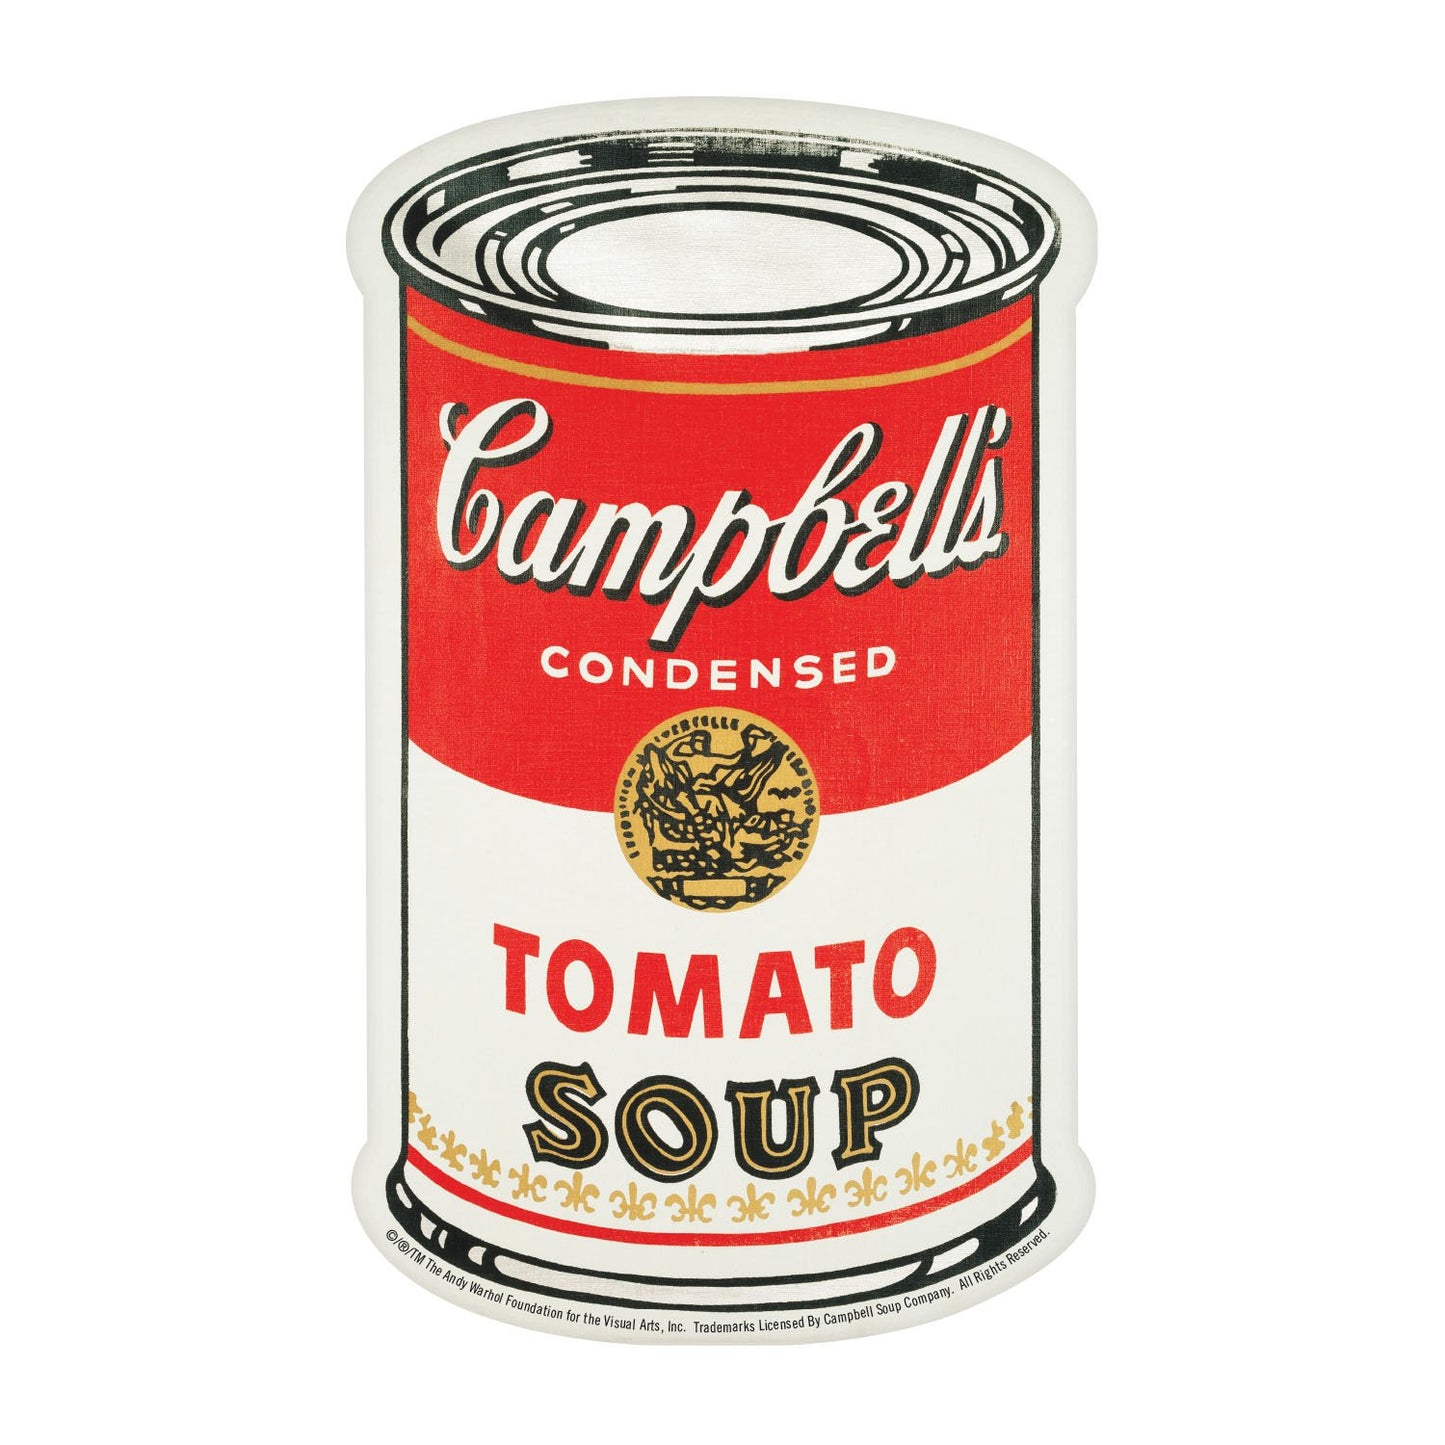 A playing card from the Andy Warhol memory game. This card is the iconic Campbells Condensed Tomato Soup image in red.